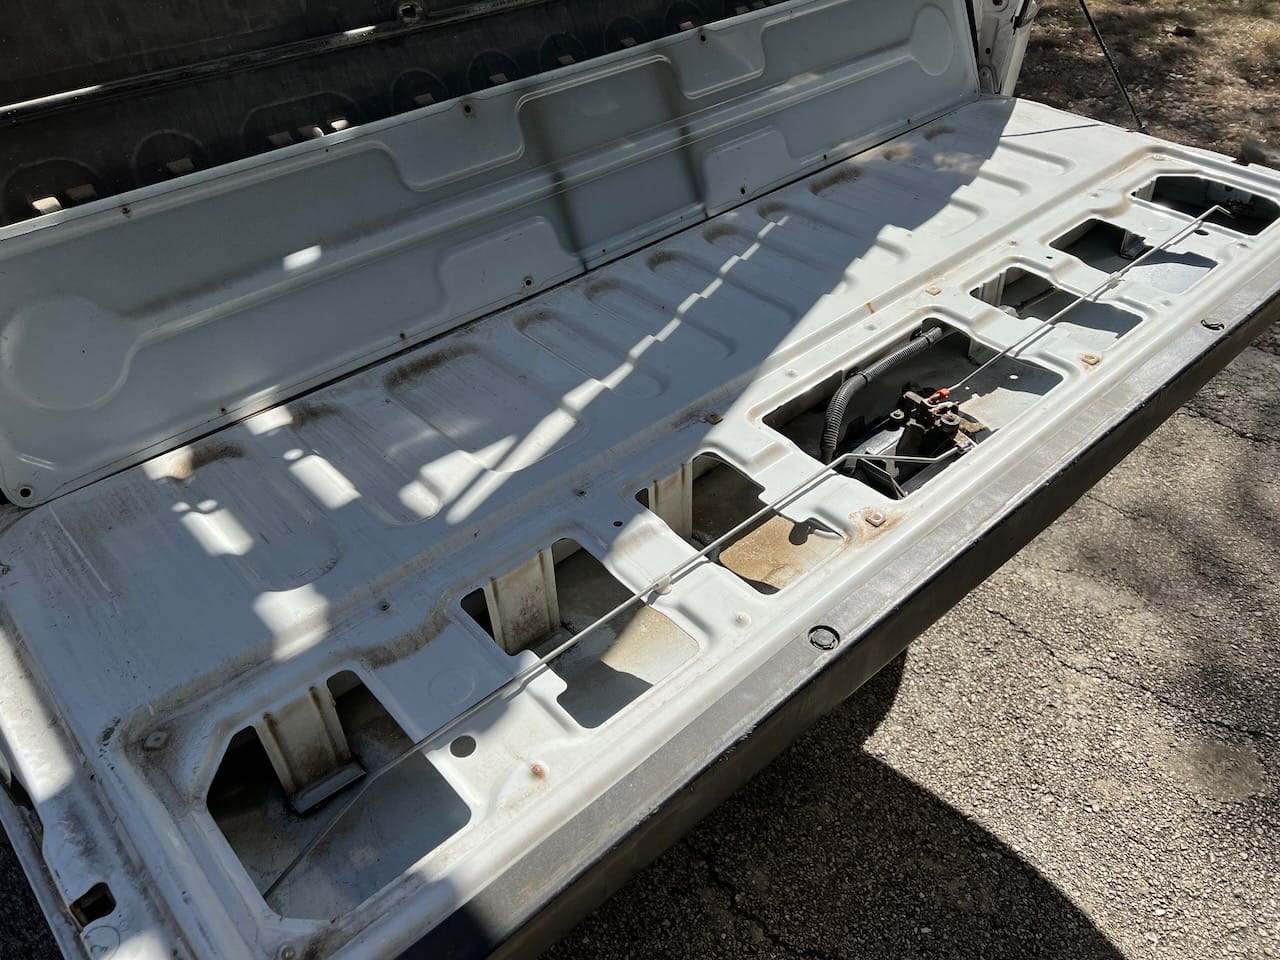 Access cover on inside of tailgate is held on with 8 torx bolts that need to be removed.